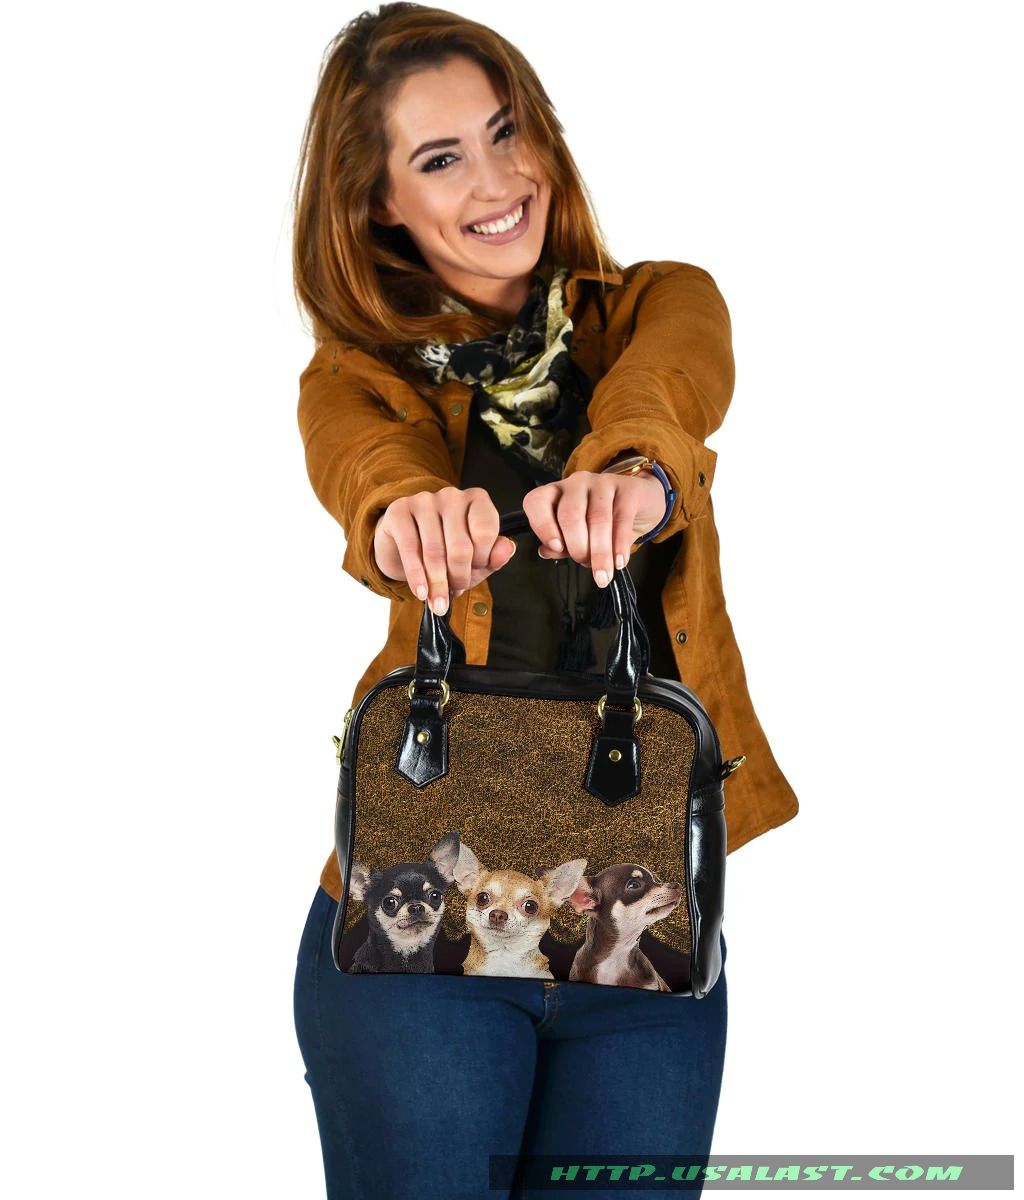 cKRMh6NU-T030322-028xxxThree-Chihuahuas-In-Hole-Brown-Leather-Pattern-Shoulder-Handbag-3.jpg